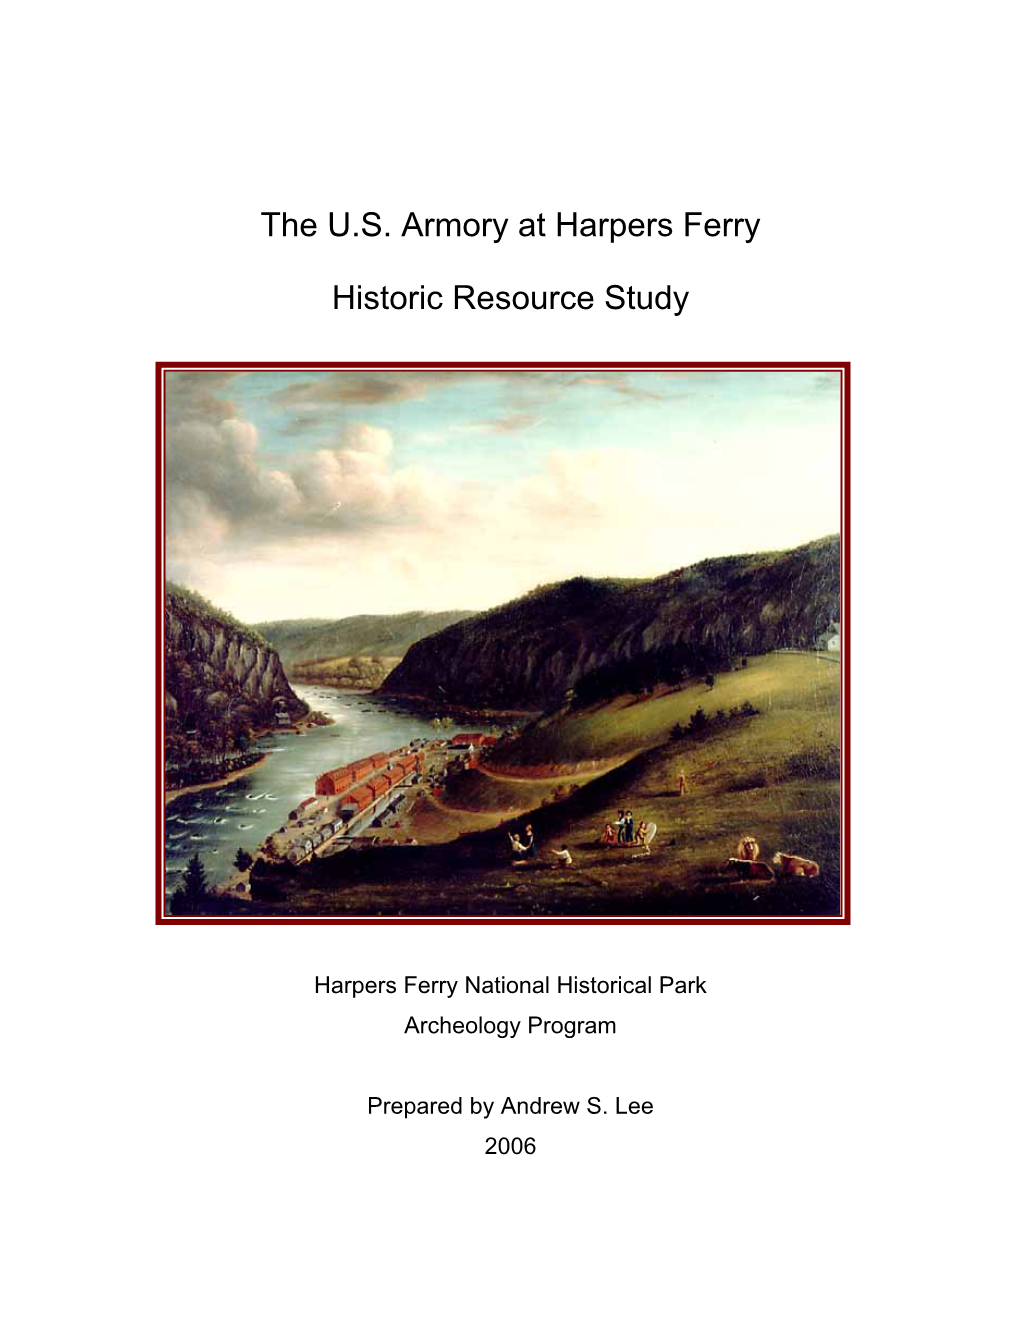 The U.S. Armory at Harpers Ferry, Historic Resource Study